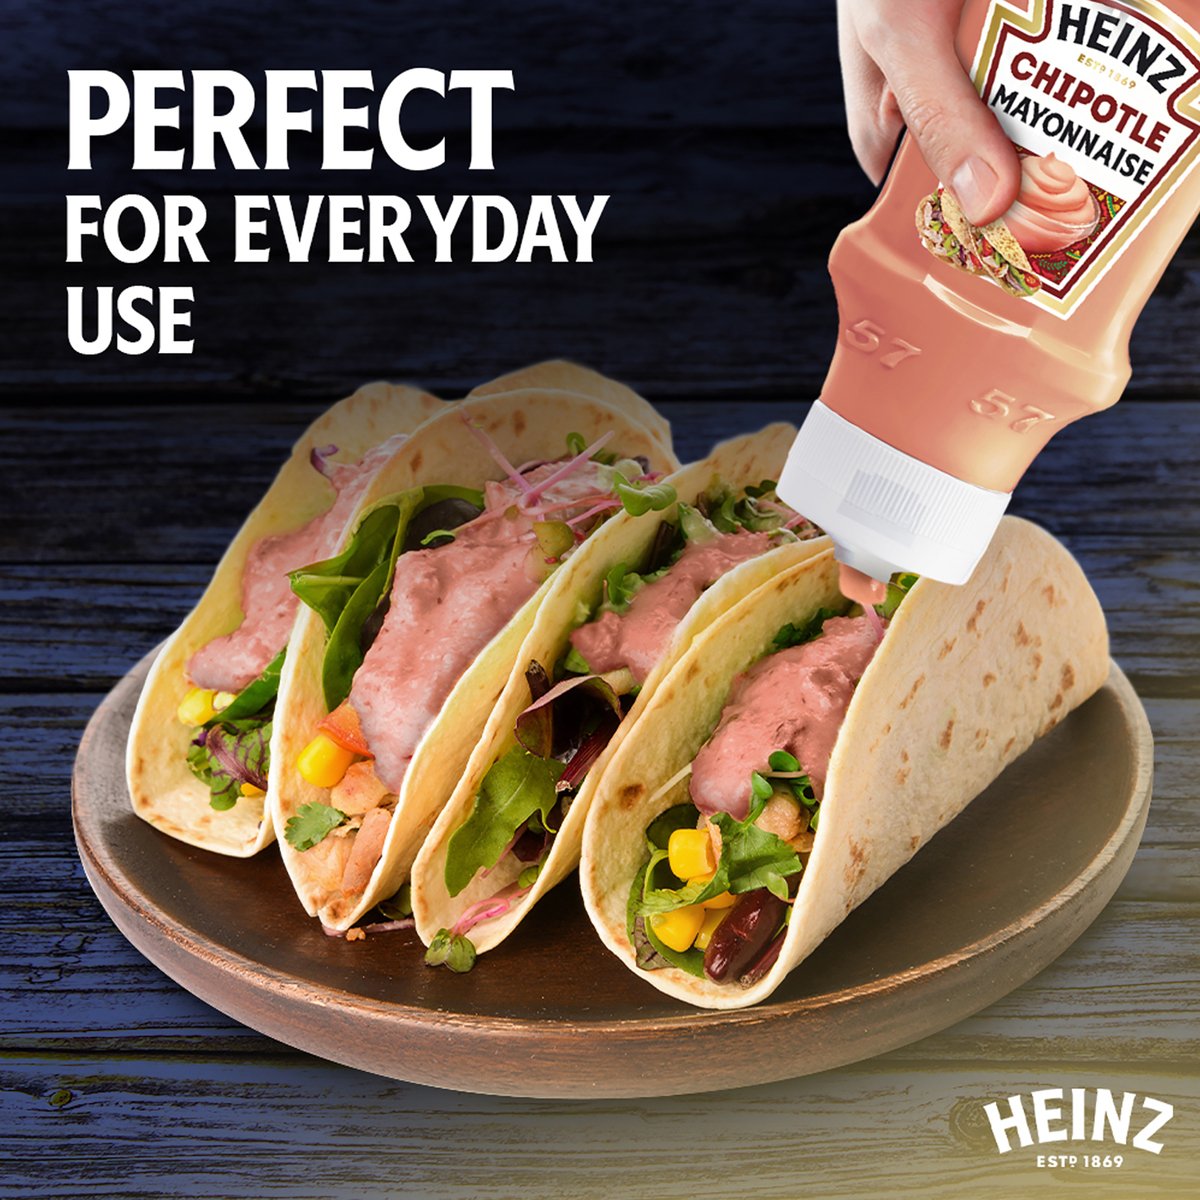 Heinz Chipotle Mayonnaise Top Down Squeezy Bottle 400ml